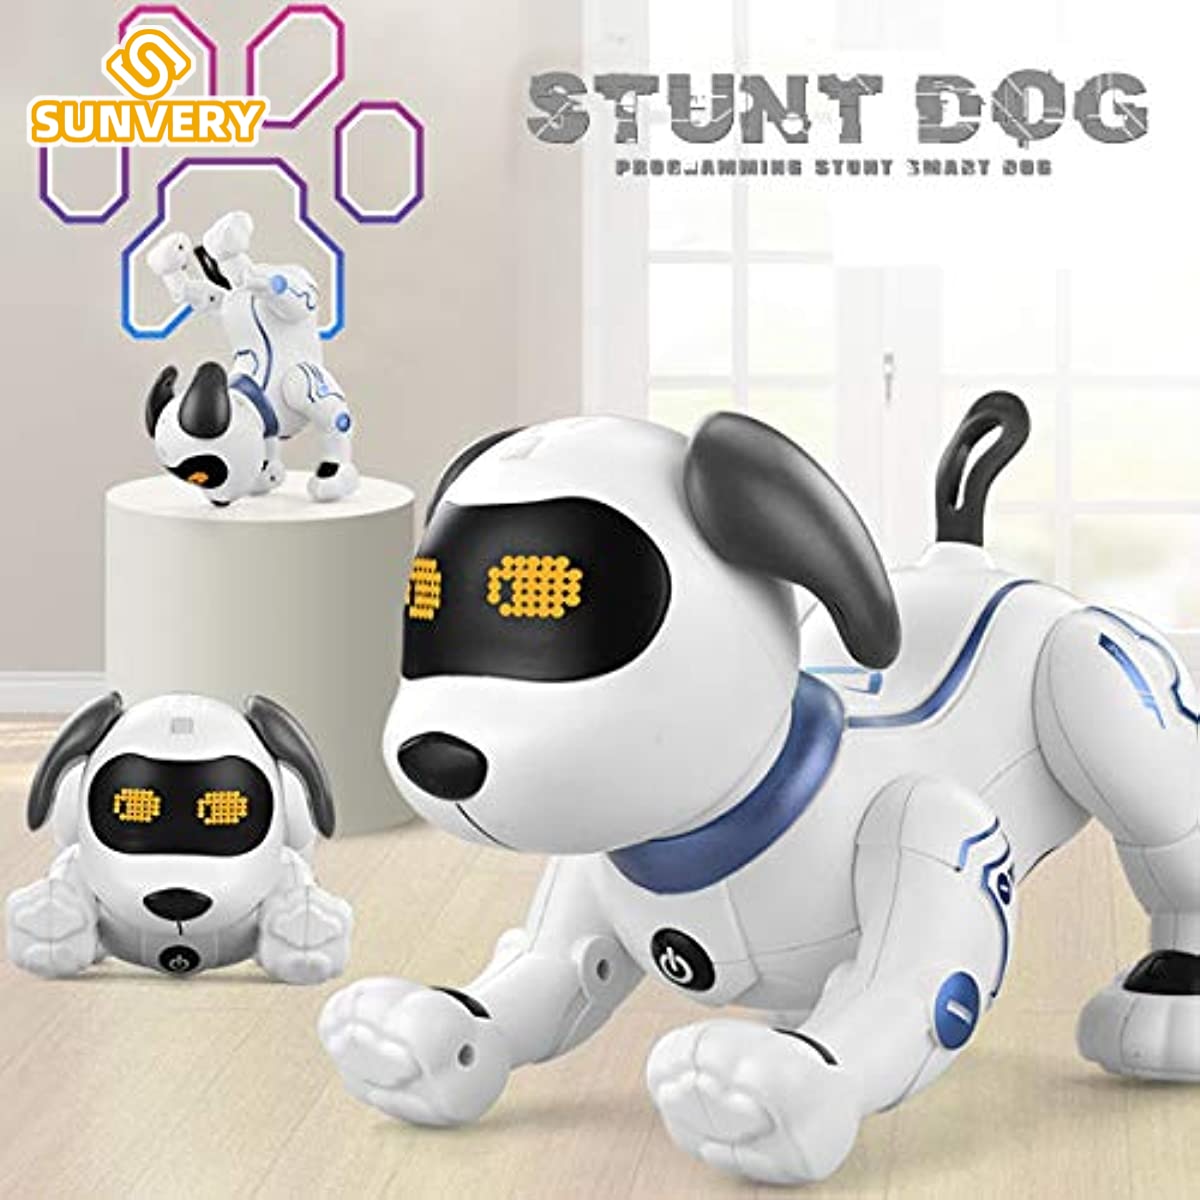 Remote Control Dog RC Robotic Stunt Puppy Voice Control Toys Handstand Push-up Electronic Pets Dancing Programmable Sound Robot